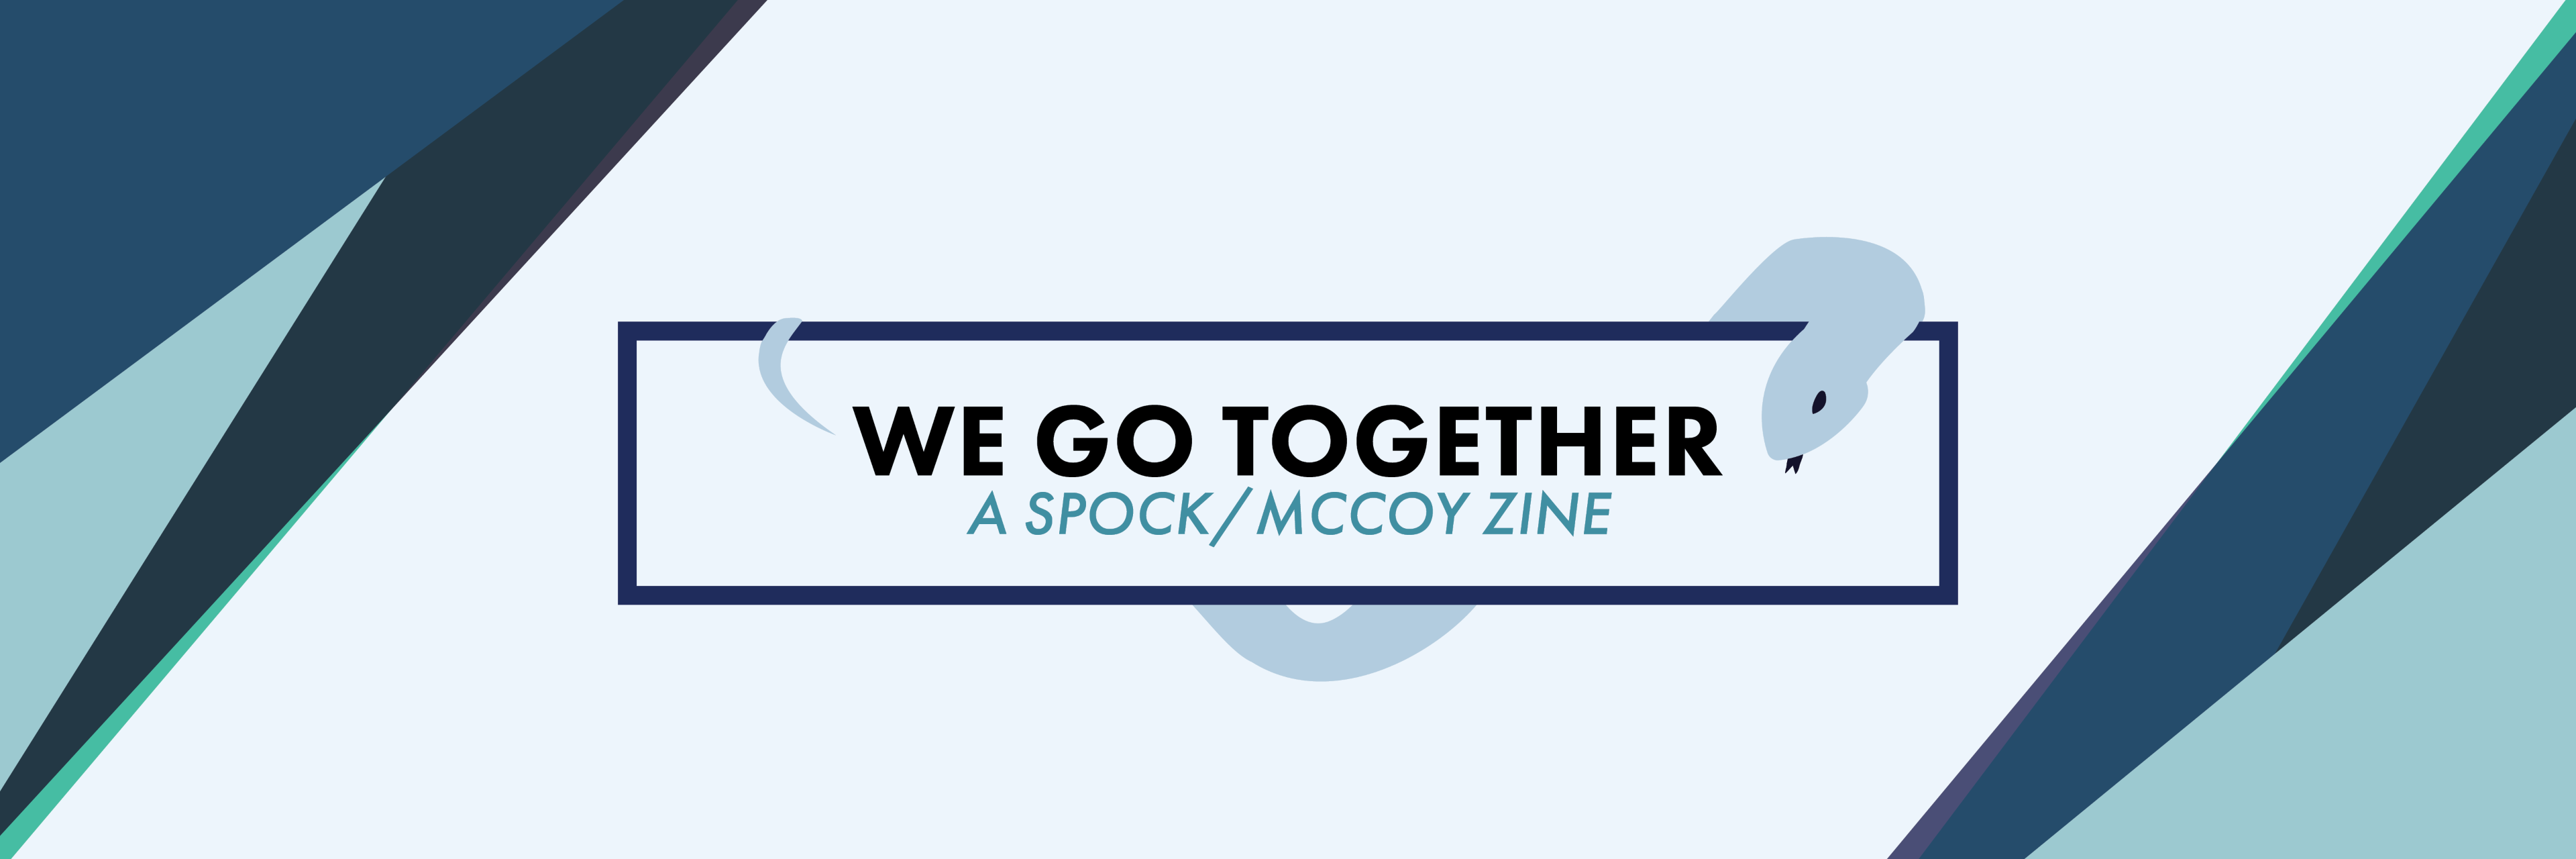 We Go Together Zine - Vol 1 Issue 1